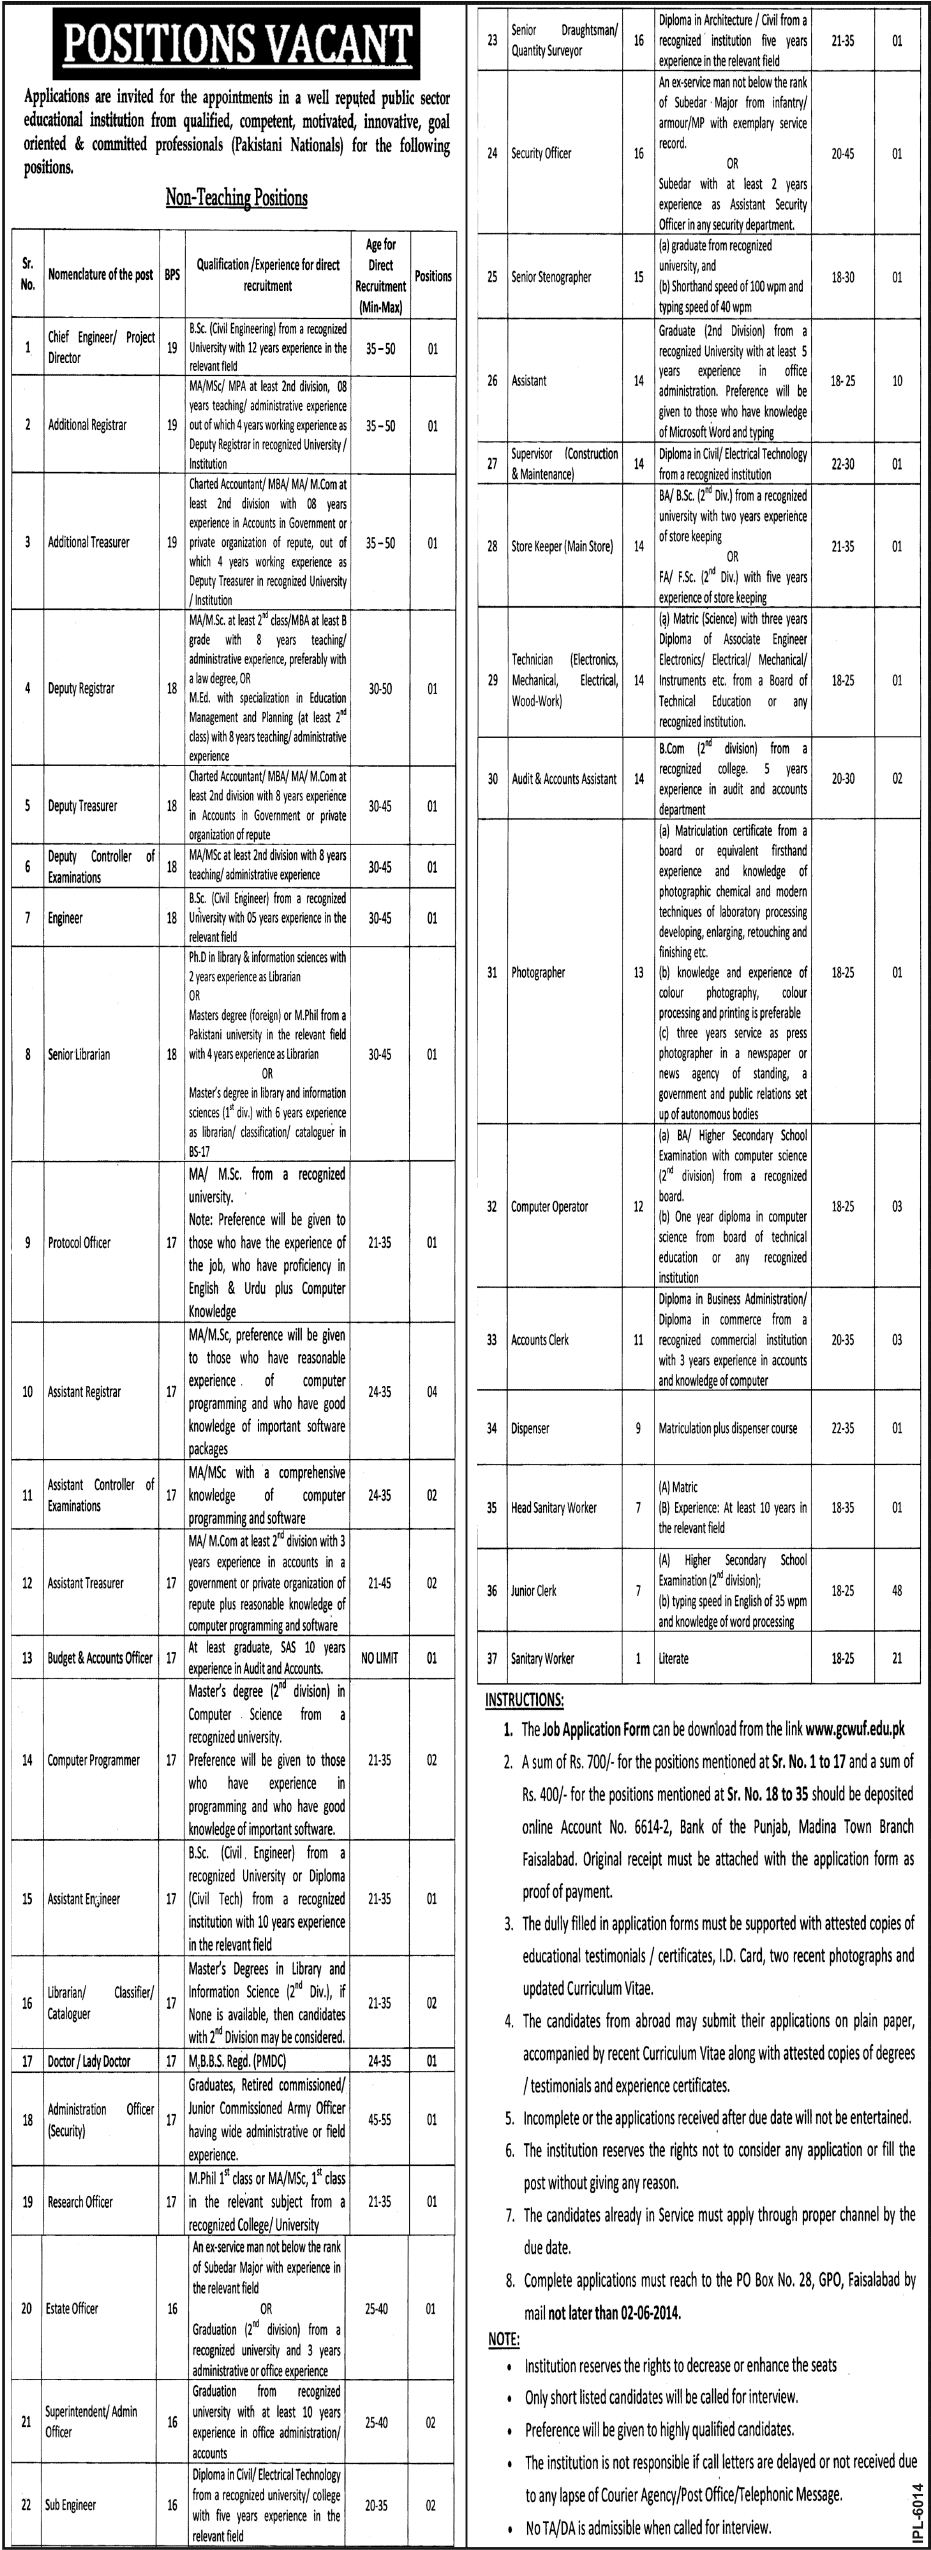 Government College Women University Faisalabad Jobs 2014 May Latest for Non-Teaching Staff - GCWUF